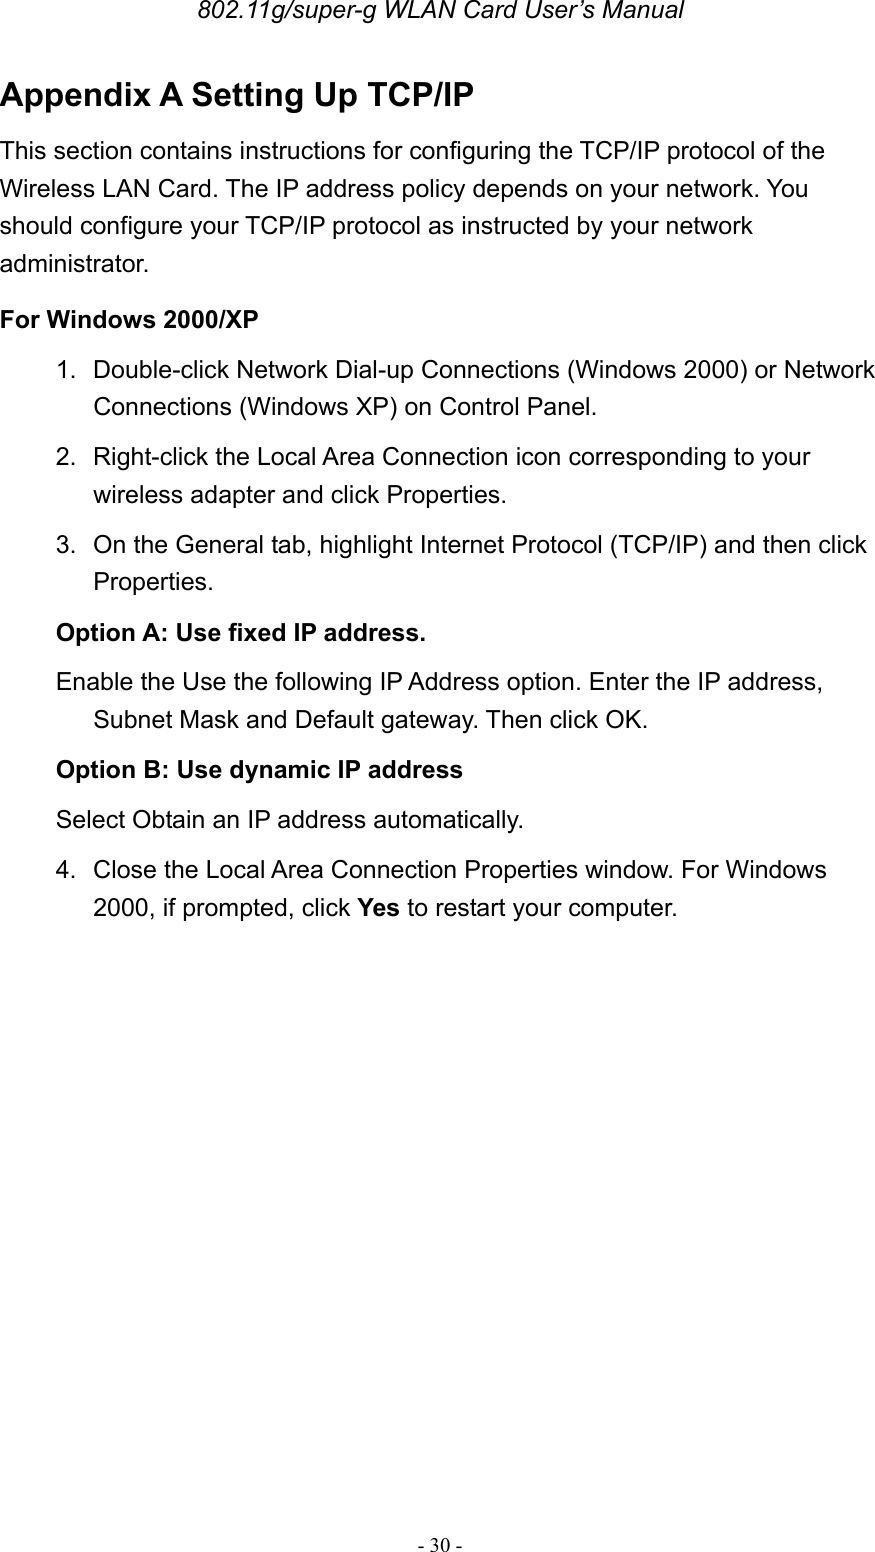 802.11g/super-g WLAN Card User’s Manual - 30 - Appendix A Setting Up TCP/IP This section contains instructions for configuring the TCP/IP protocol of the Wireless LAN Card. The IP address policy depends on your network. You should configure your TCP/IP protocol as instructed by your network administrator. For Windows 2000/XP 1. Double-click Network Dial-up Connections (Windows 2000) or Network Connections (Windows XP) on Control Panel. 2.  Right-click the Local Area Connection icon corresponding to your wireless adapter and click Properties. 3.  On the General tab, highlight Internet Protocol (TCP/IP) and then click Properties. Option A: Use fixed IP address. Enable the Use the following IP Address option. Enter the IP address, Subnet Mask and Default gateway. Then click OK. Option B: Use dynamic IP address Select Obtain an IP address automatically. 4.  Close the Local Area Connection Properties window. For Windows 2000, if prompted, click Yes to restart your computer.     